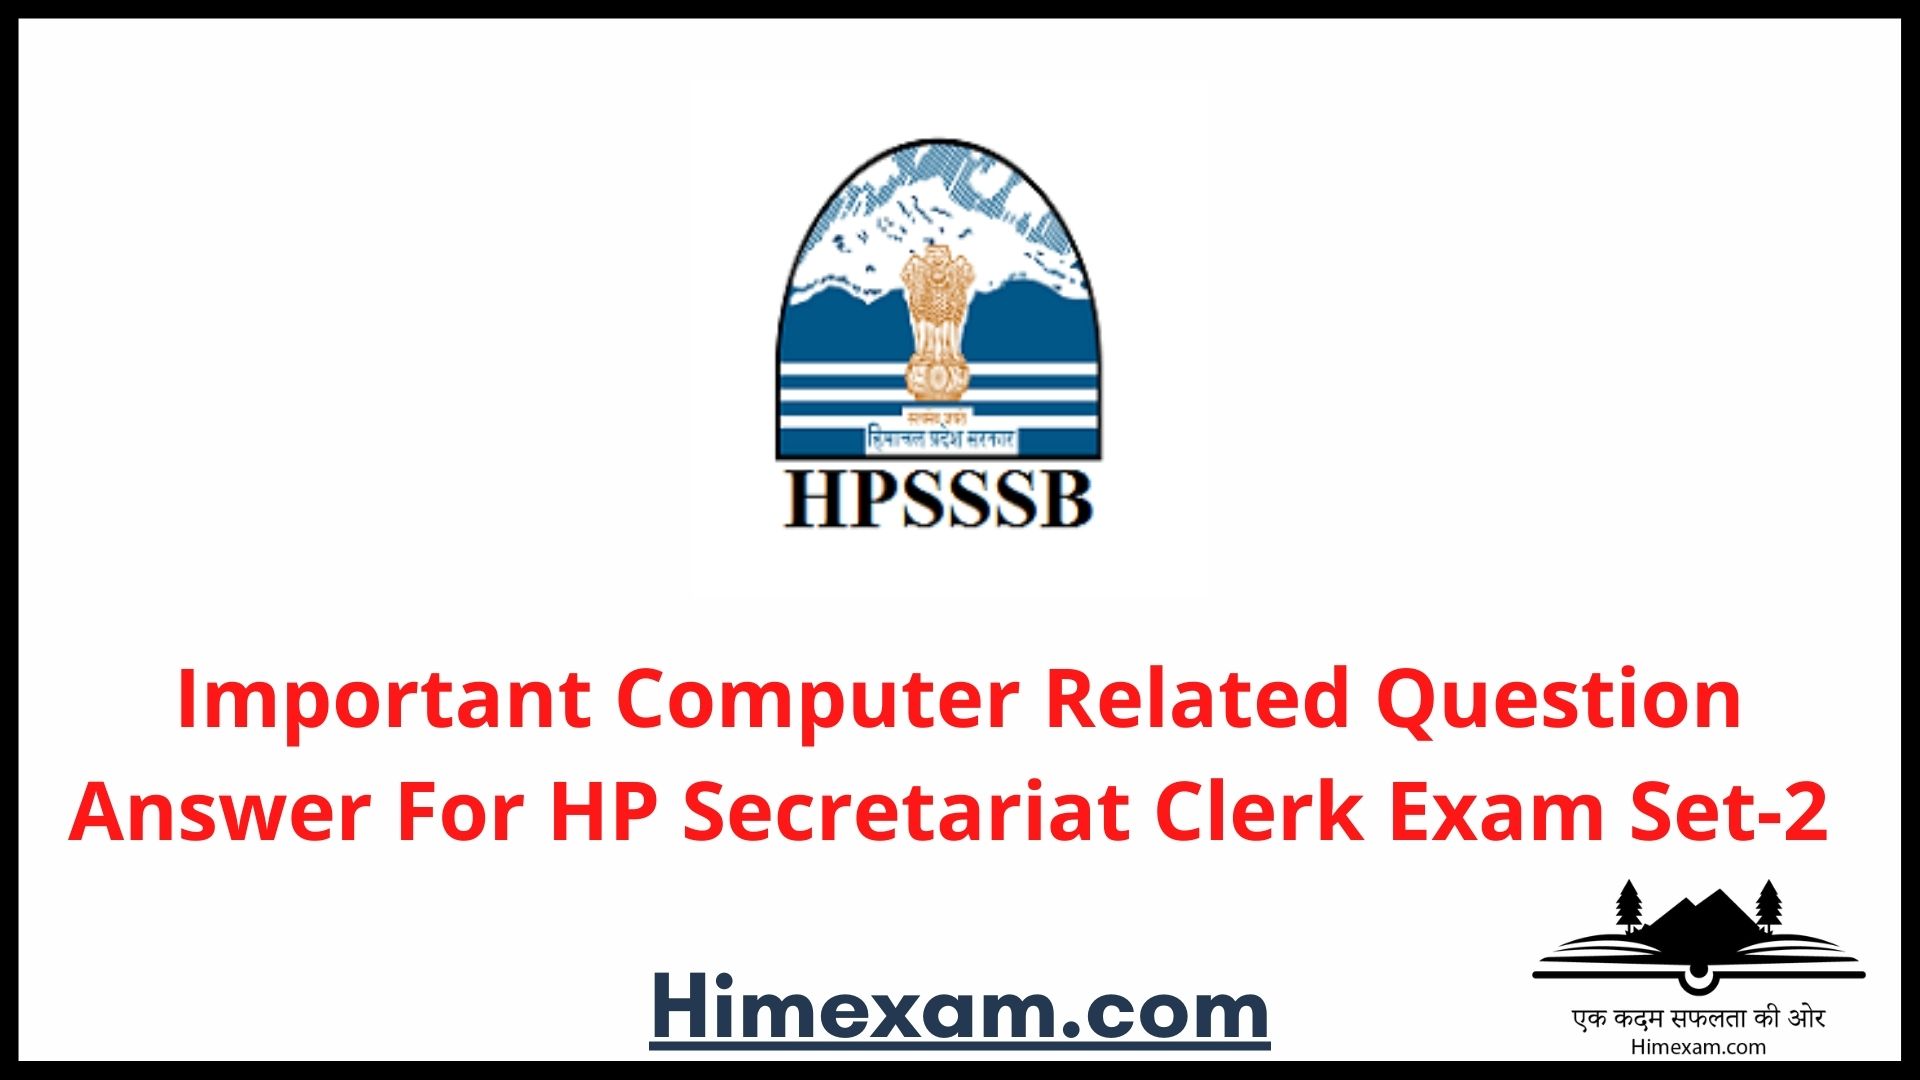 Important Computer Related Question Answer For HP Secretariat Clerk Exam Set-2